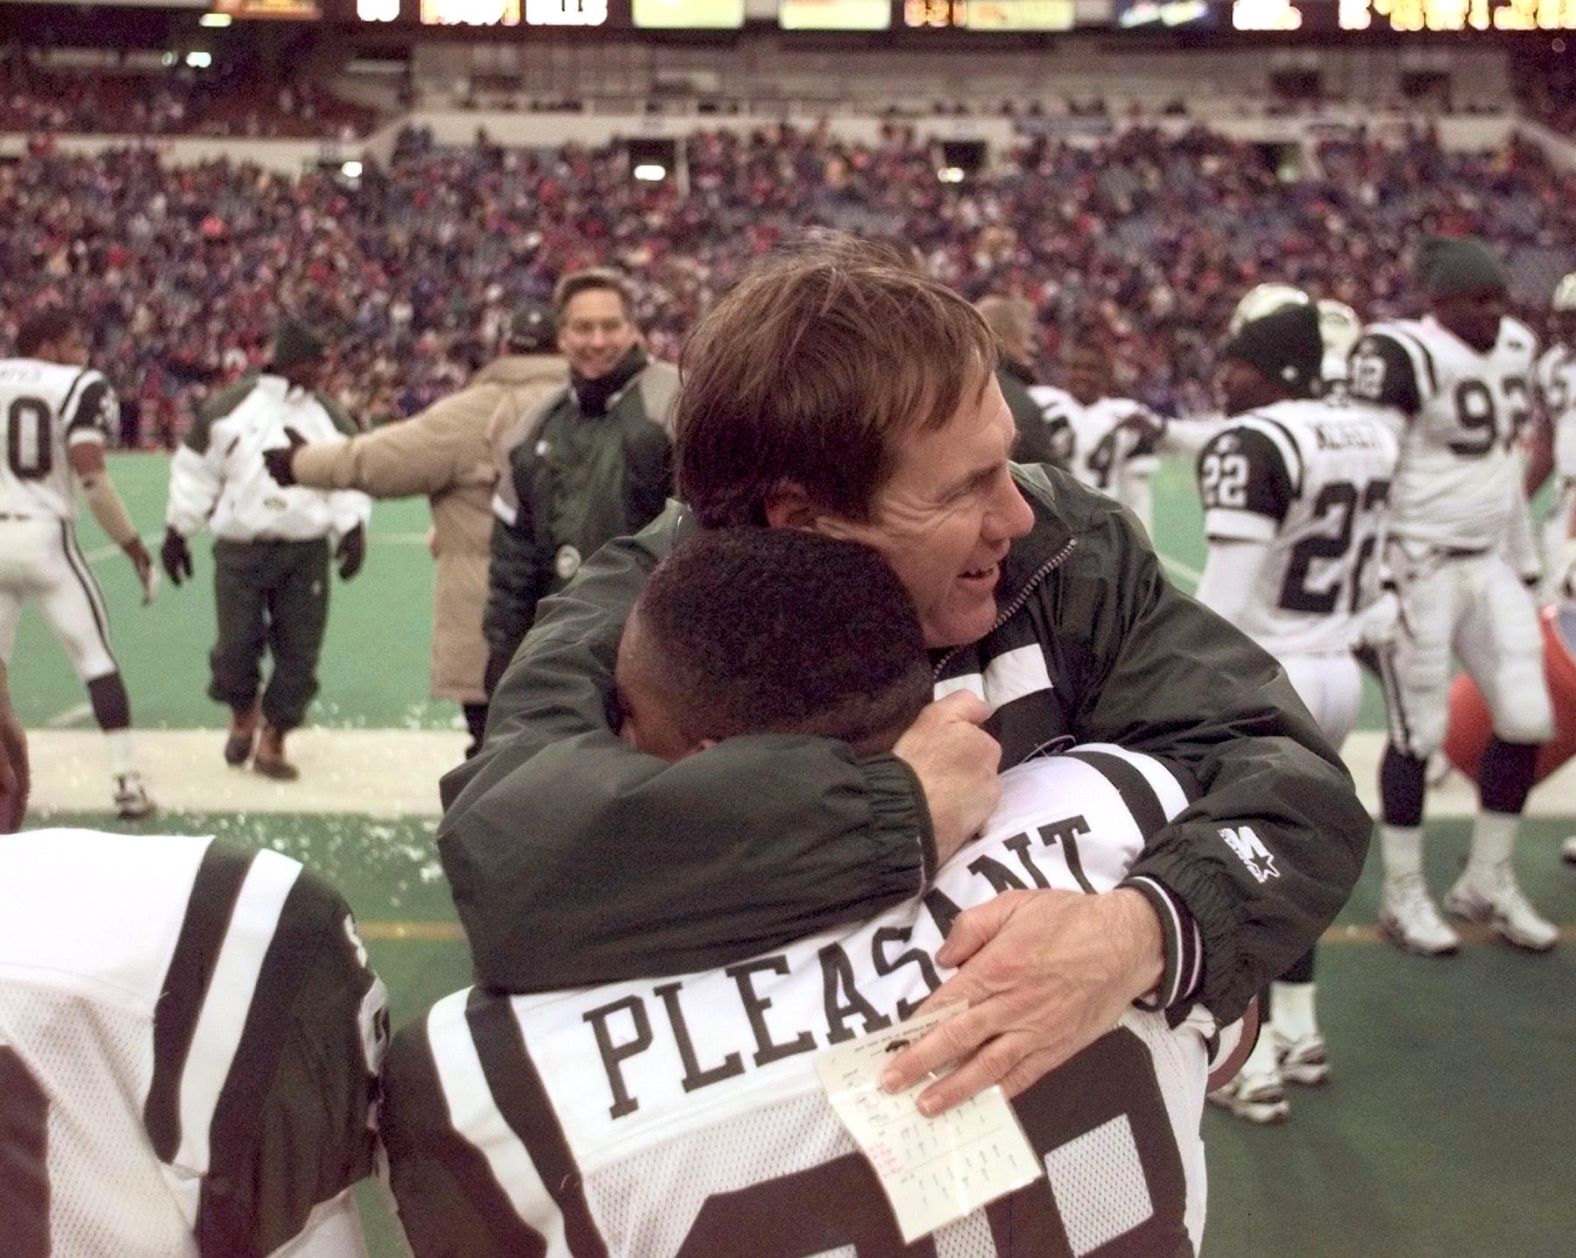 Belichick hugs Anthony Pleasant after defeating the Buffalo Bills in 1998. He was serving under Parcells again as the New York Jets' defensive coordinator.